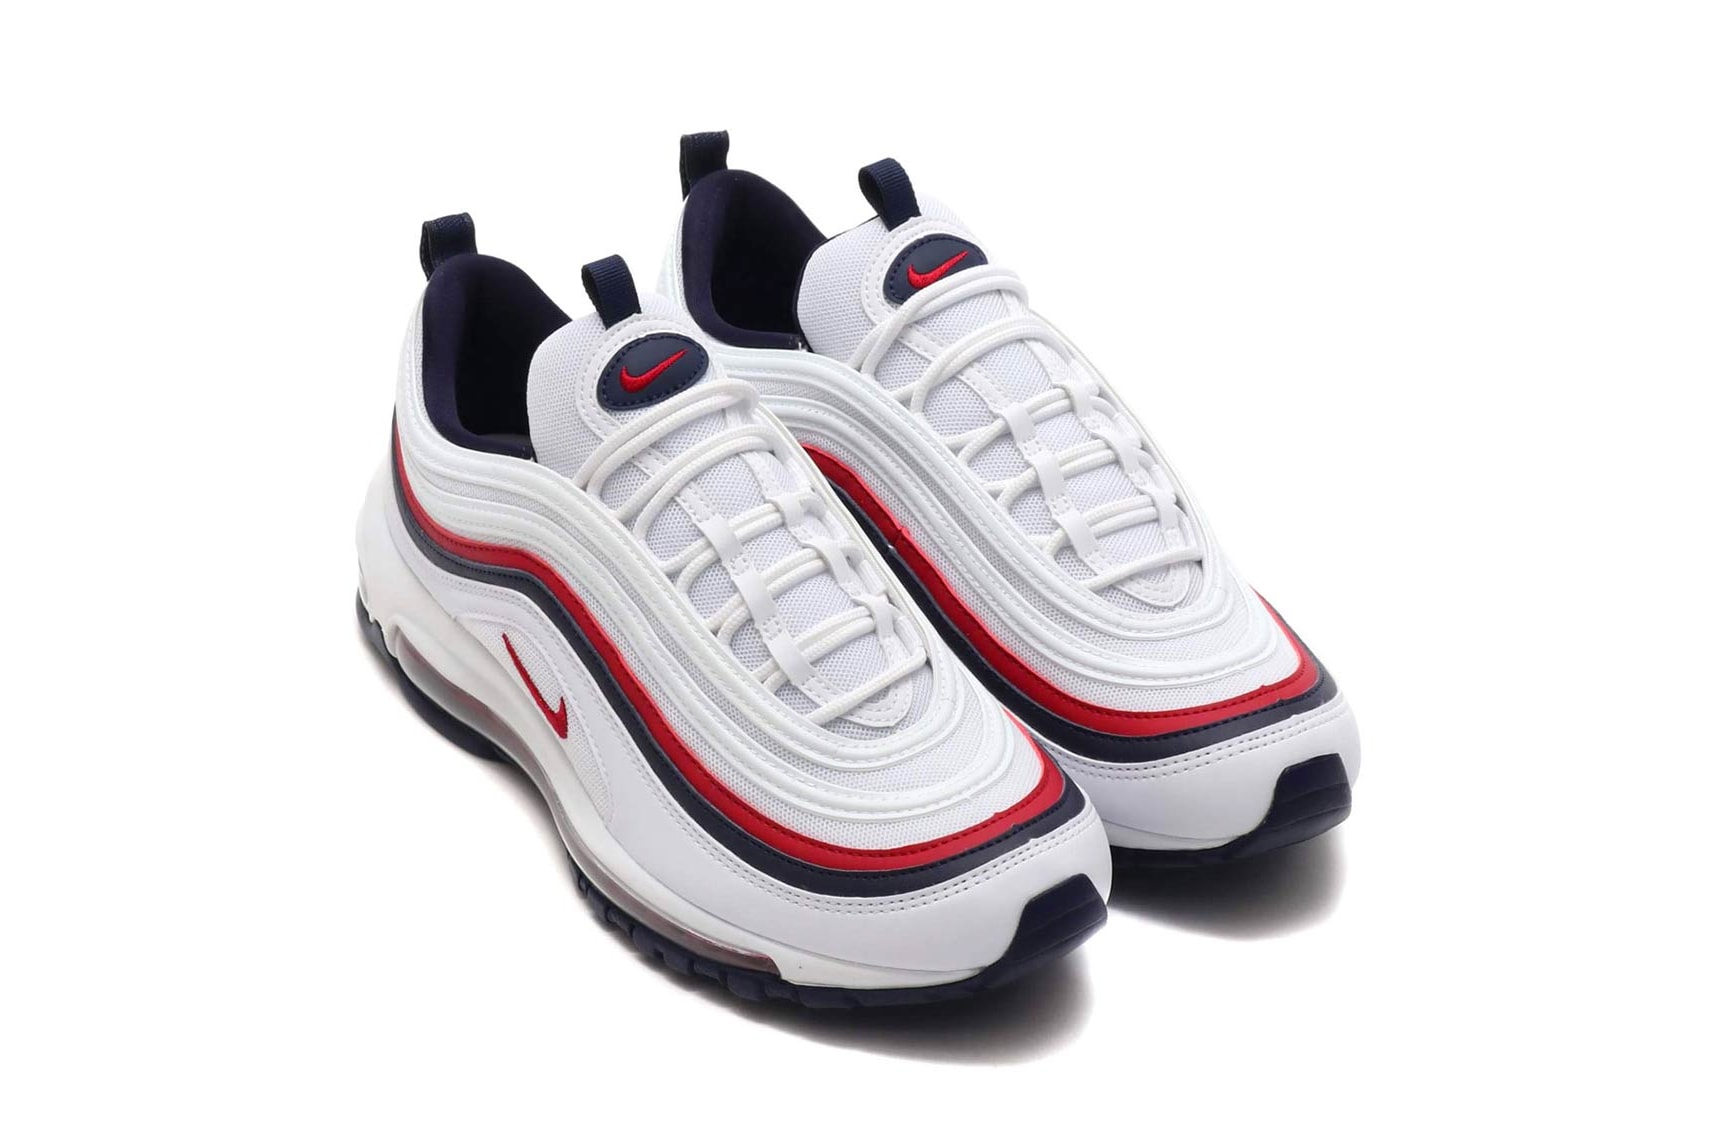 Nike Air Max 97 in "Red Crush" Sneaker White Red Womens Size Exclusive Navy Blue